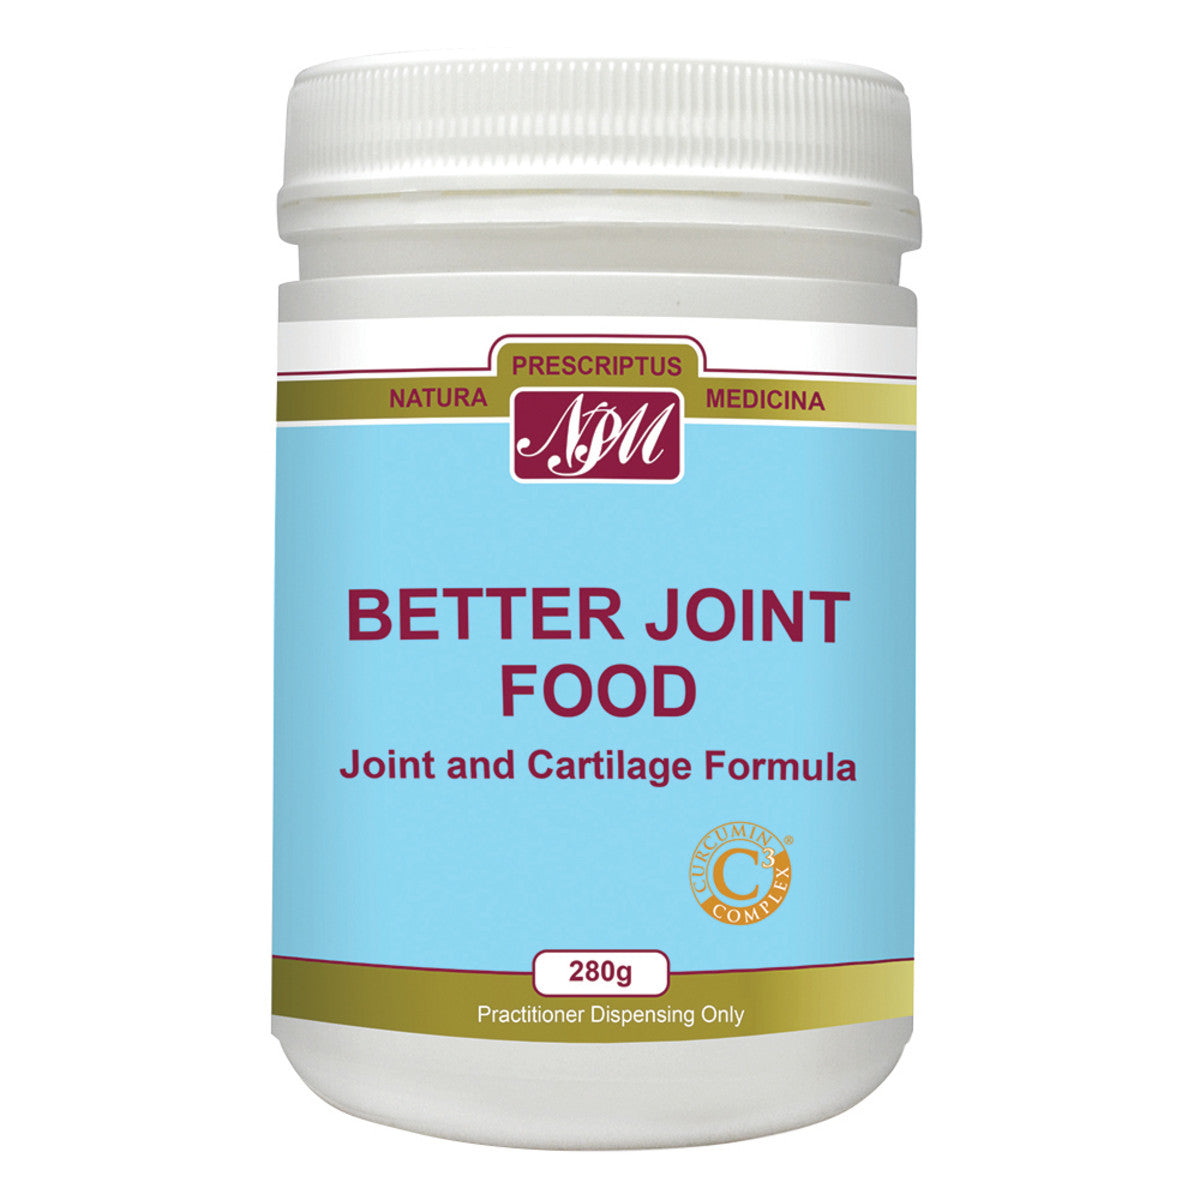 NPM Better Joint Food 280g